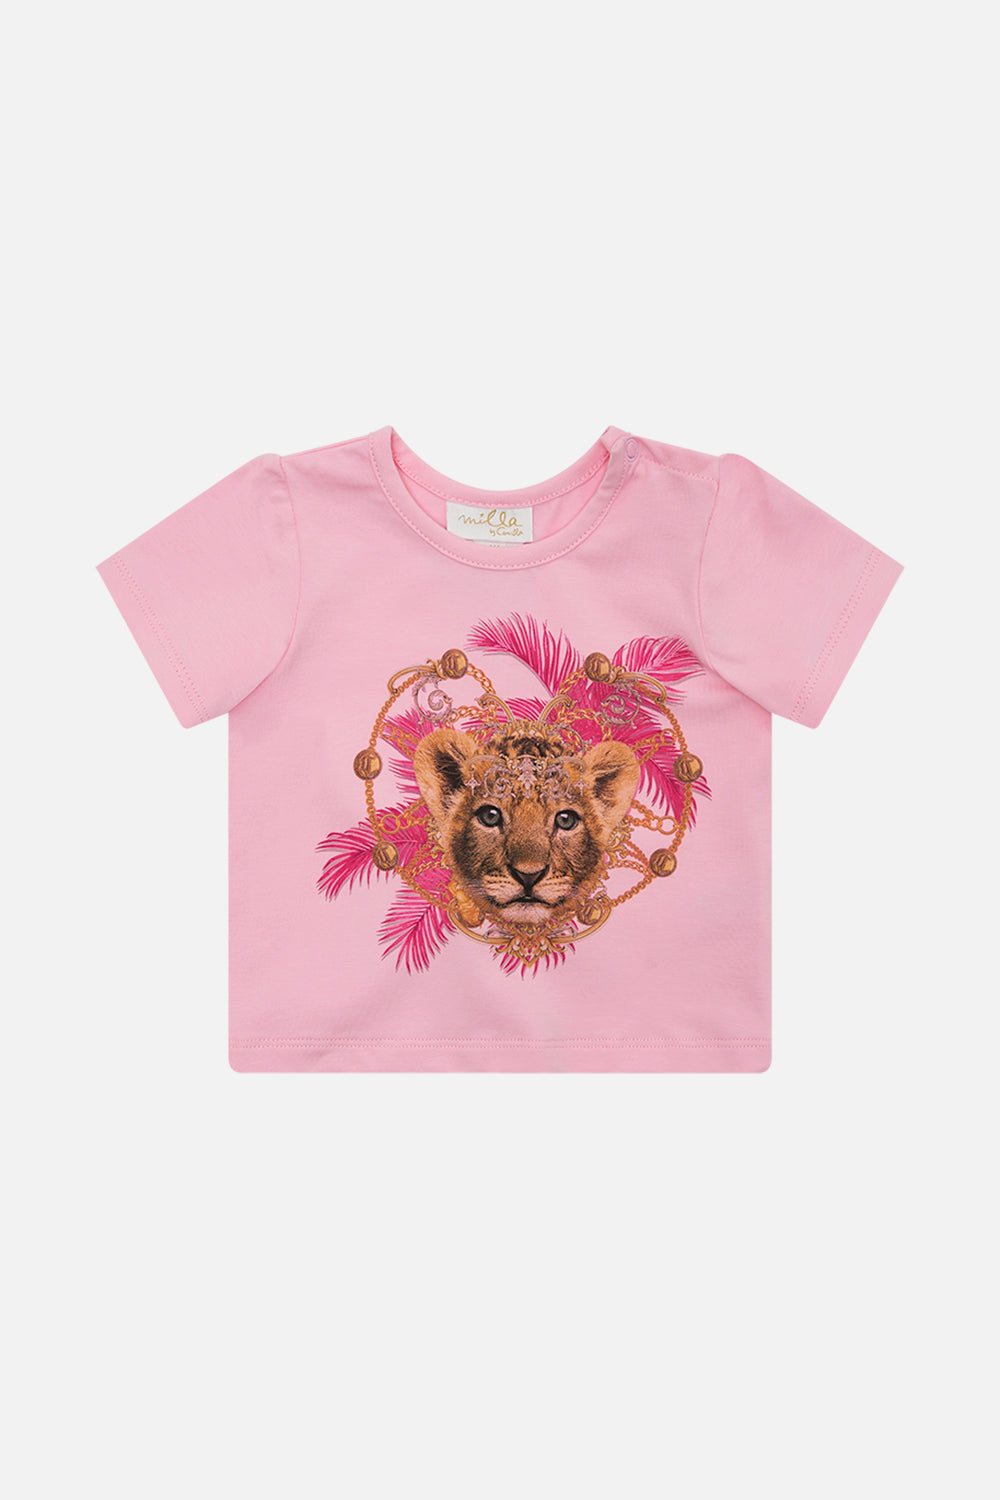 Product view of MILLA By CAMILLA babies pink tee in TipToe The Tightrope print